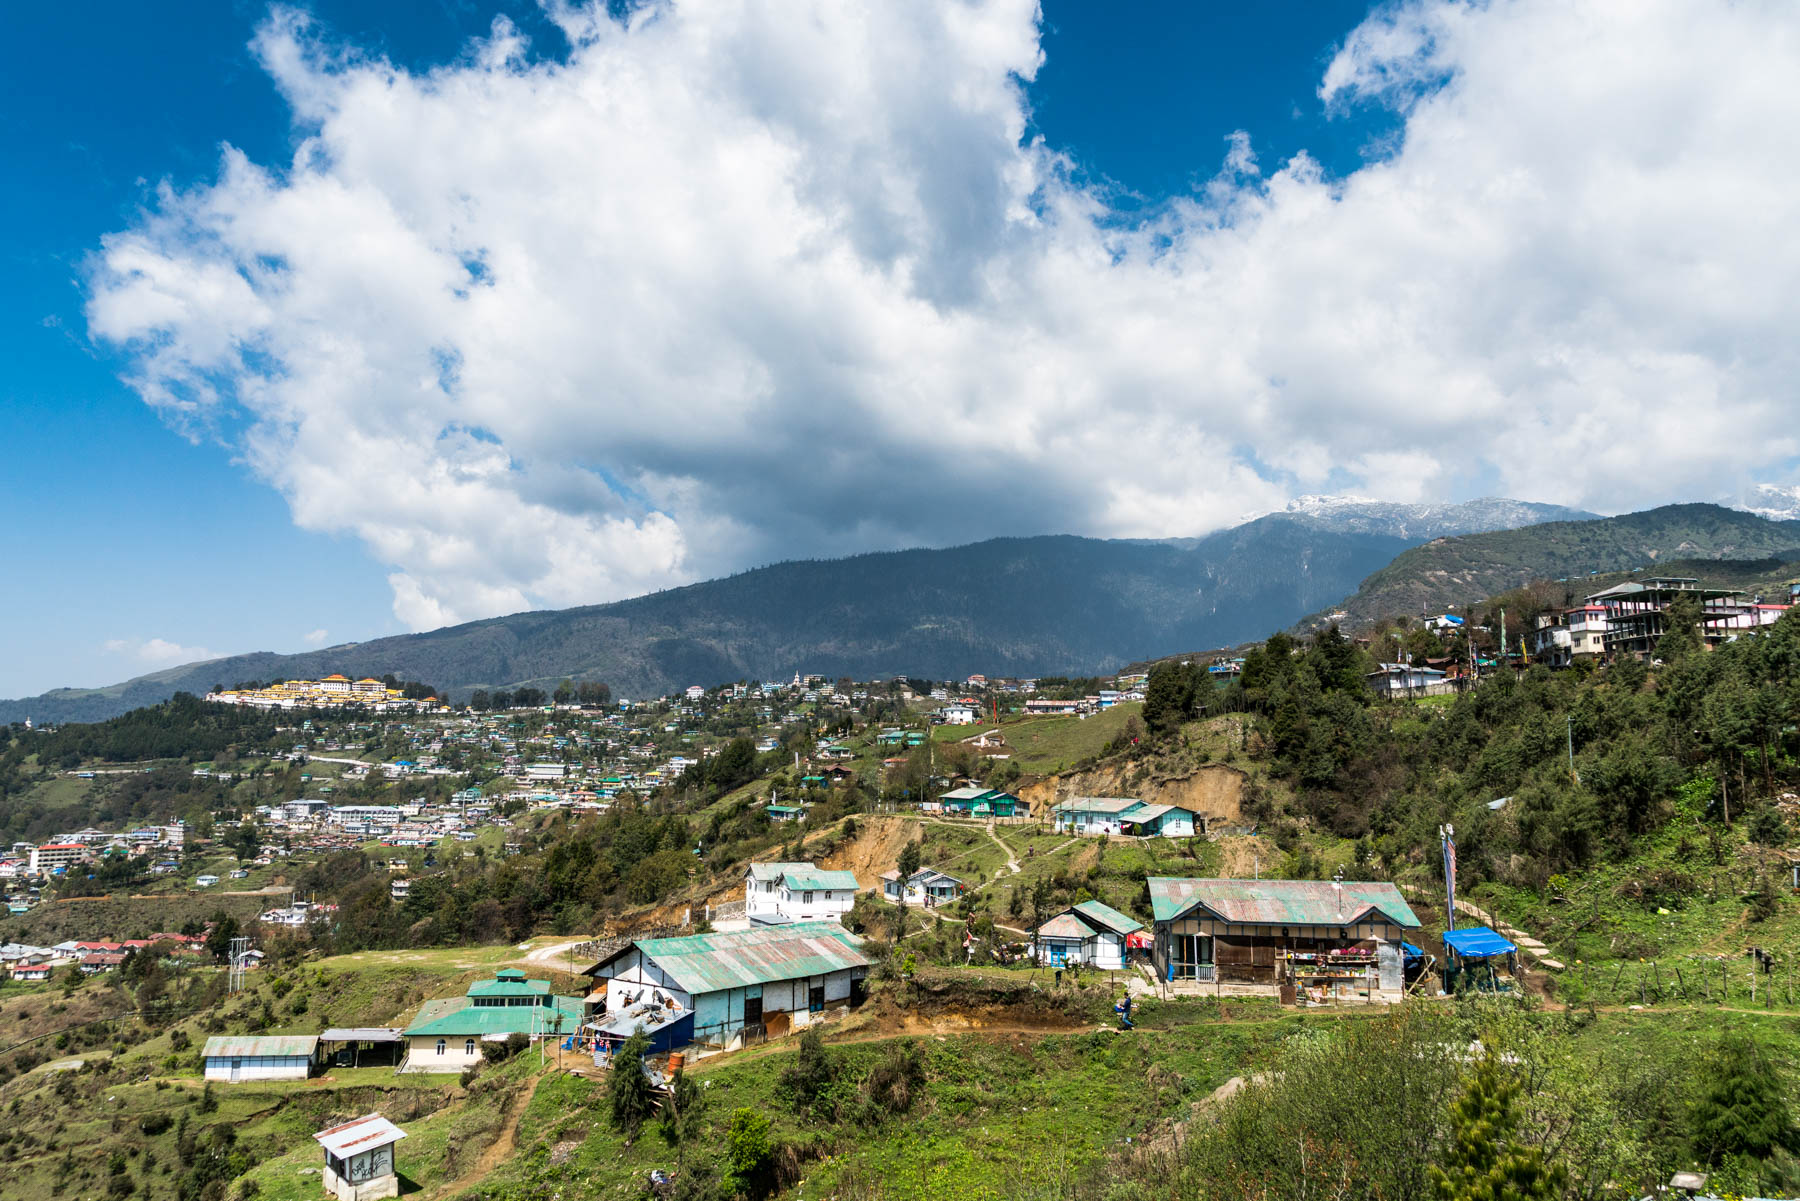 How much it costs to go backpacking in Arunachal Pradesh, India - Tawang town on a sunny day - Lost With Purpose